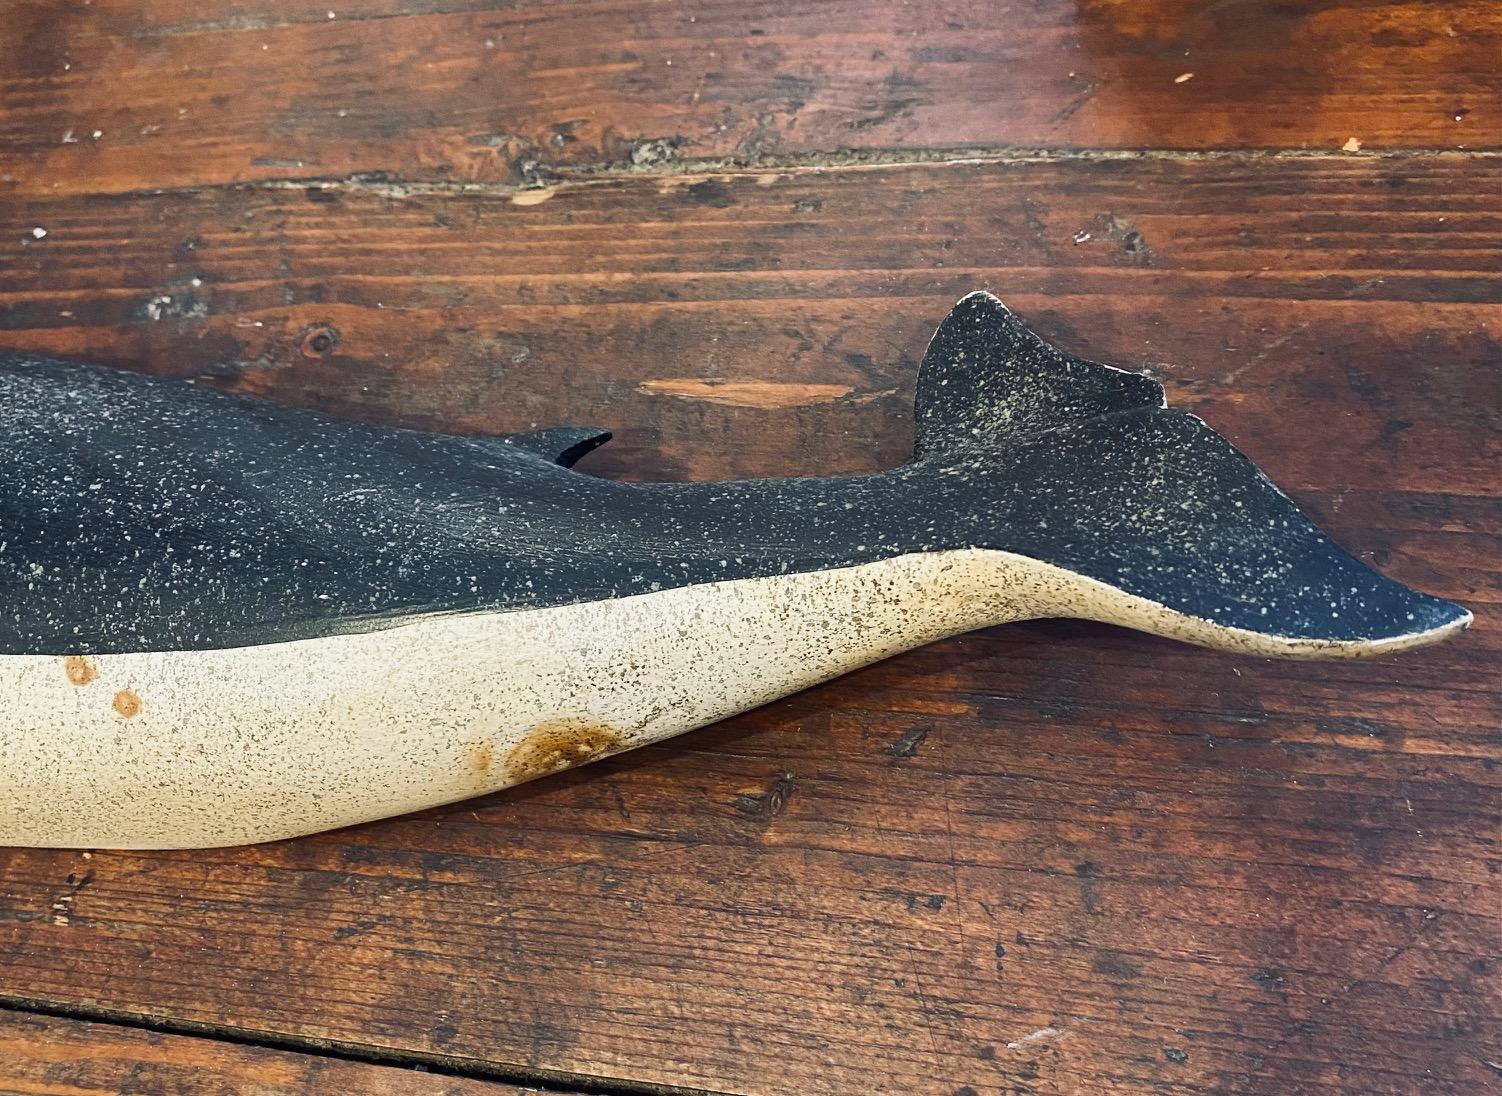 Folk Art Carved and Decorated Finback Whale Plaque by Clark Voorhees, circa 1960